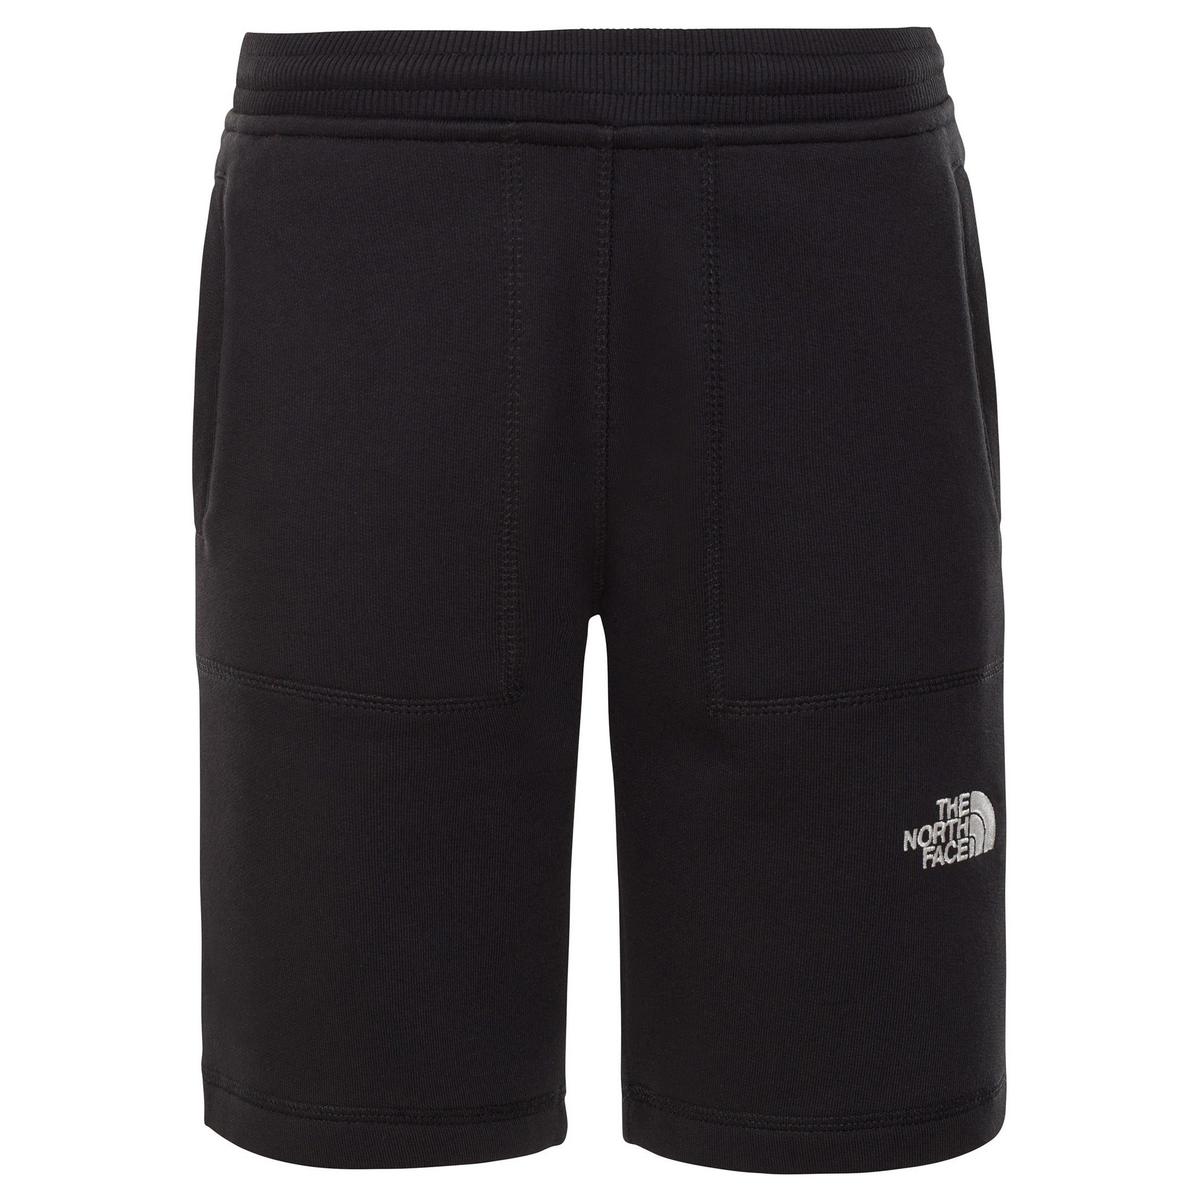 The North Face Kids' Youth Fleece Shorts